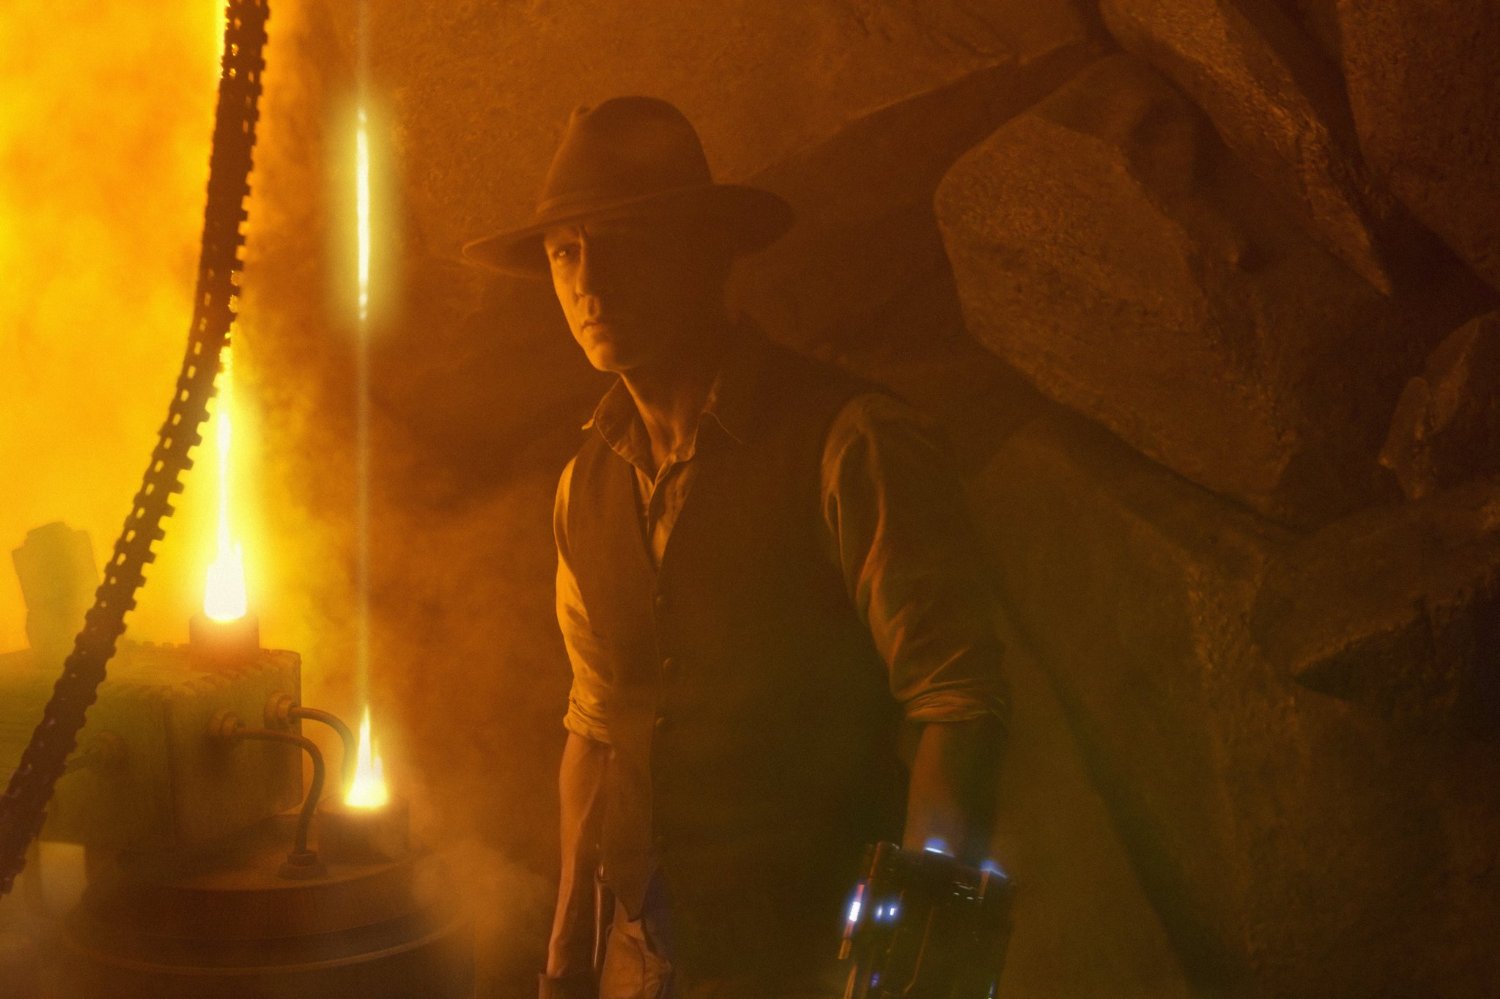 Cowboys and Aliens 2011 Watch Online on 123Movies!1500 x 999